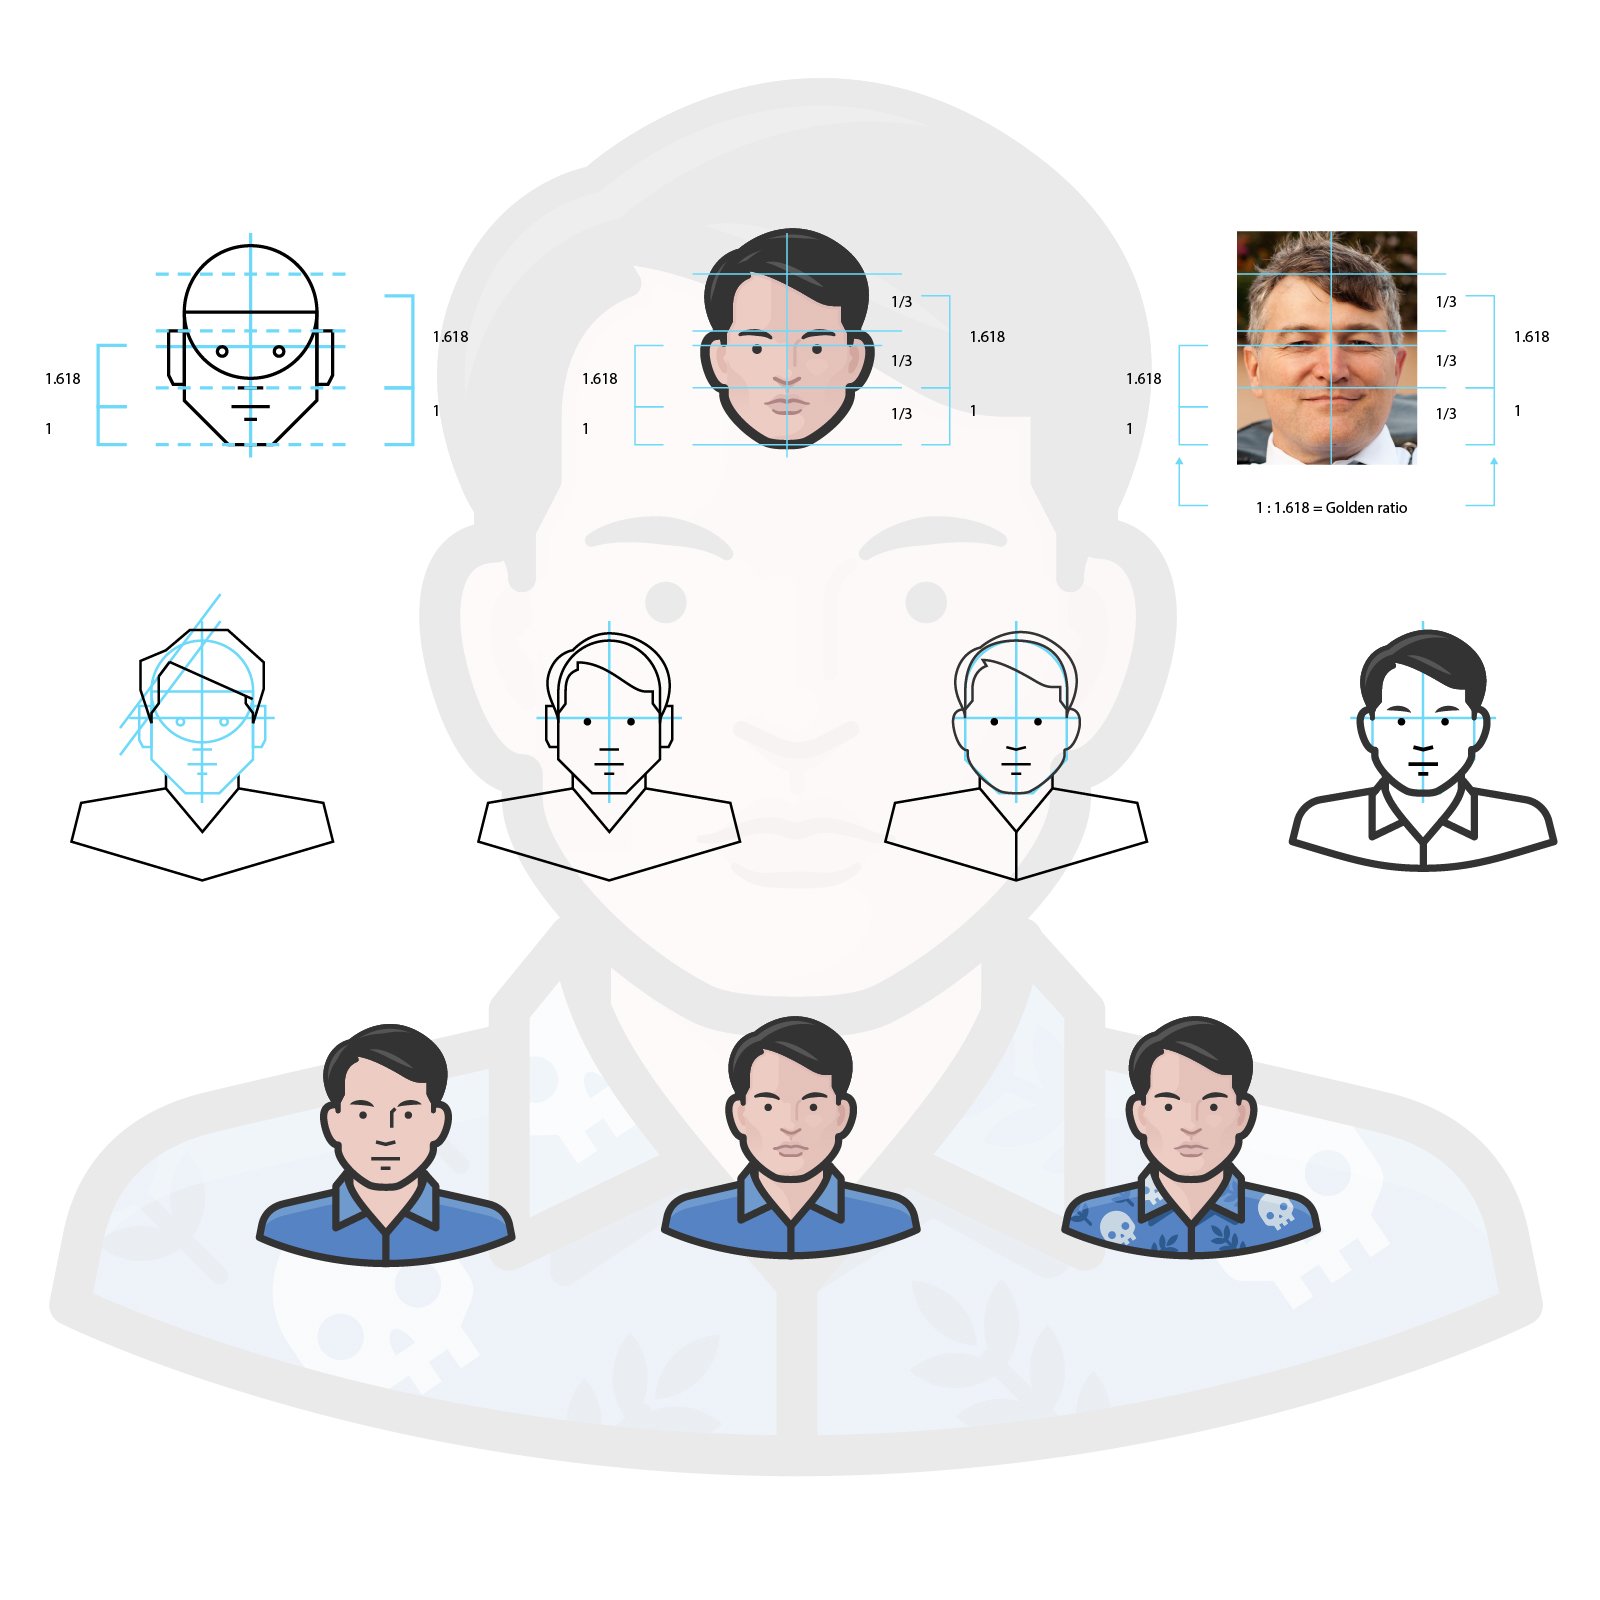 How to create filled-line avatars with Scott Lewis